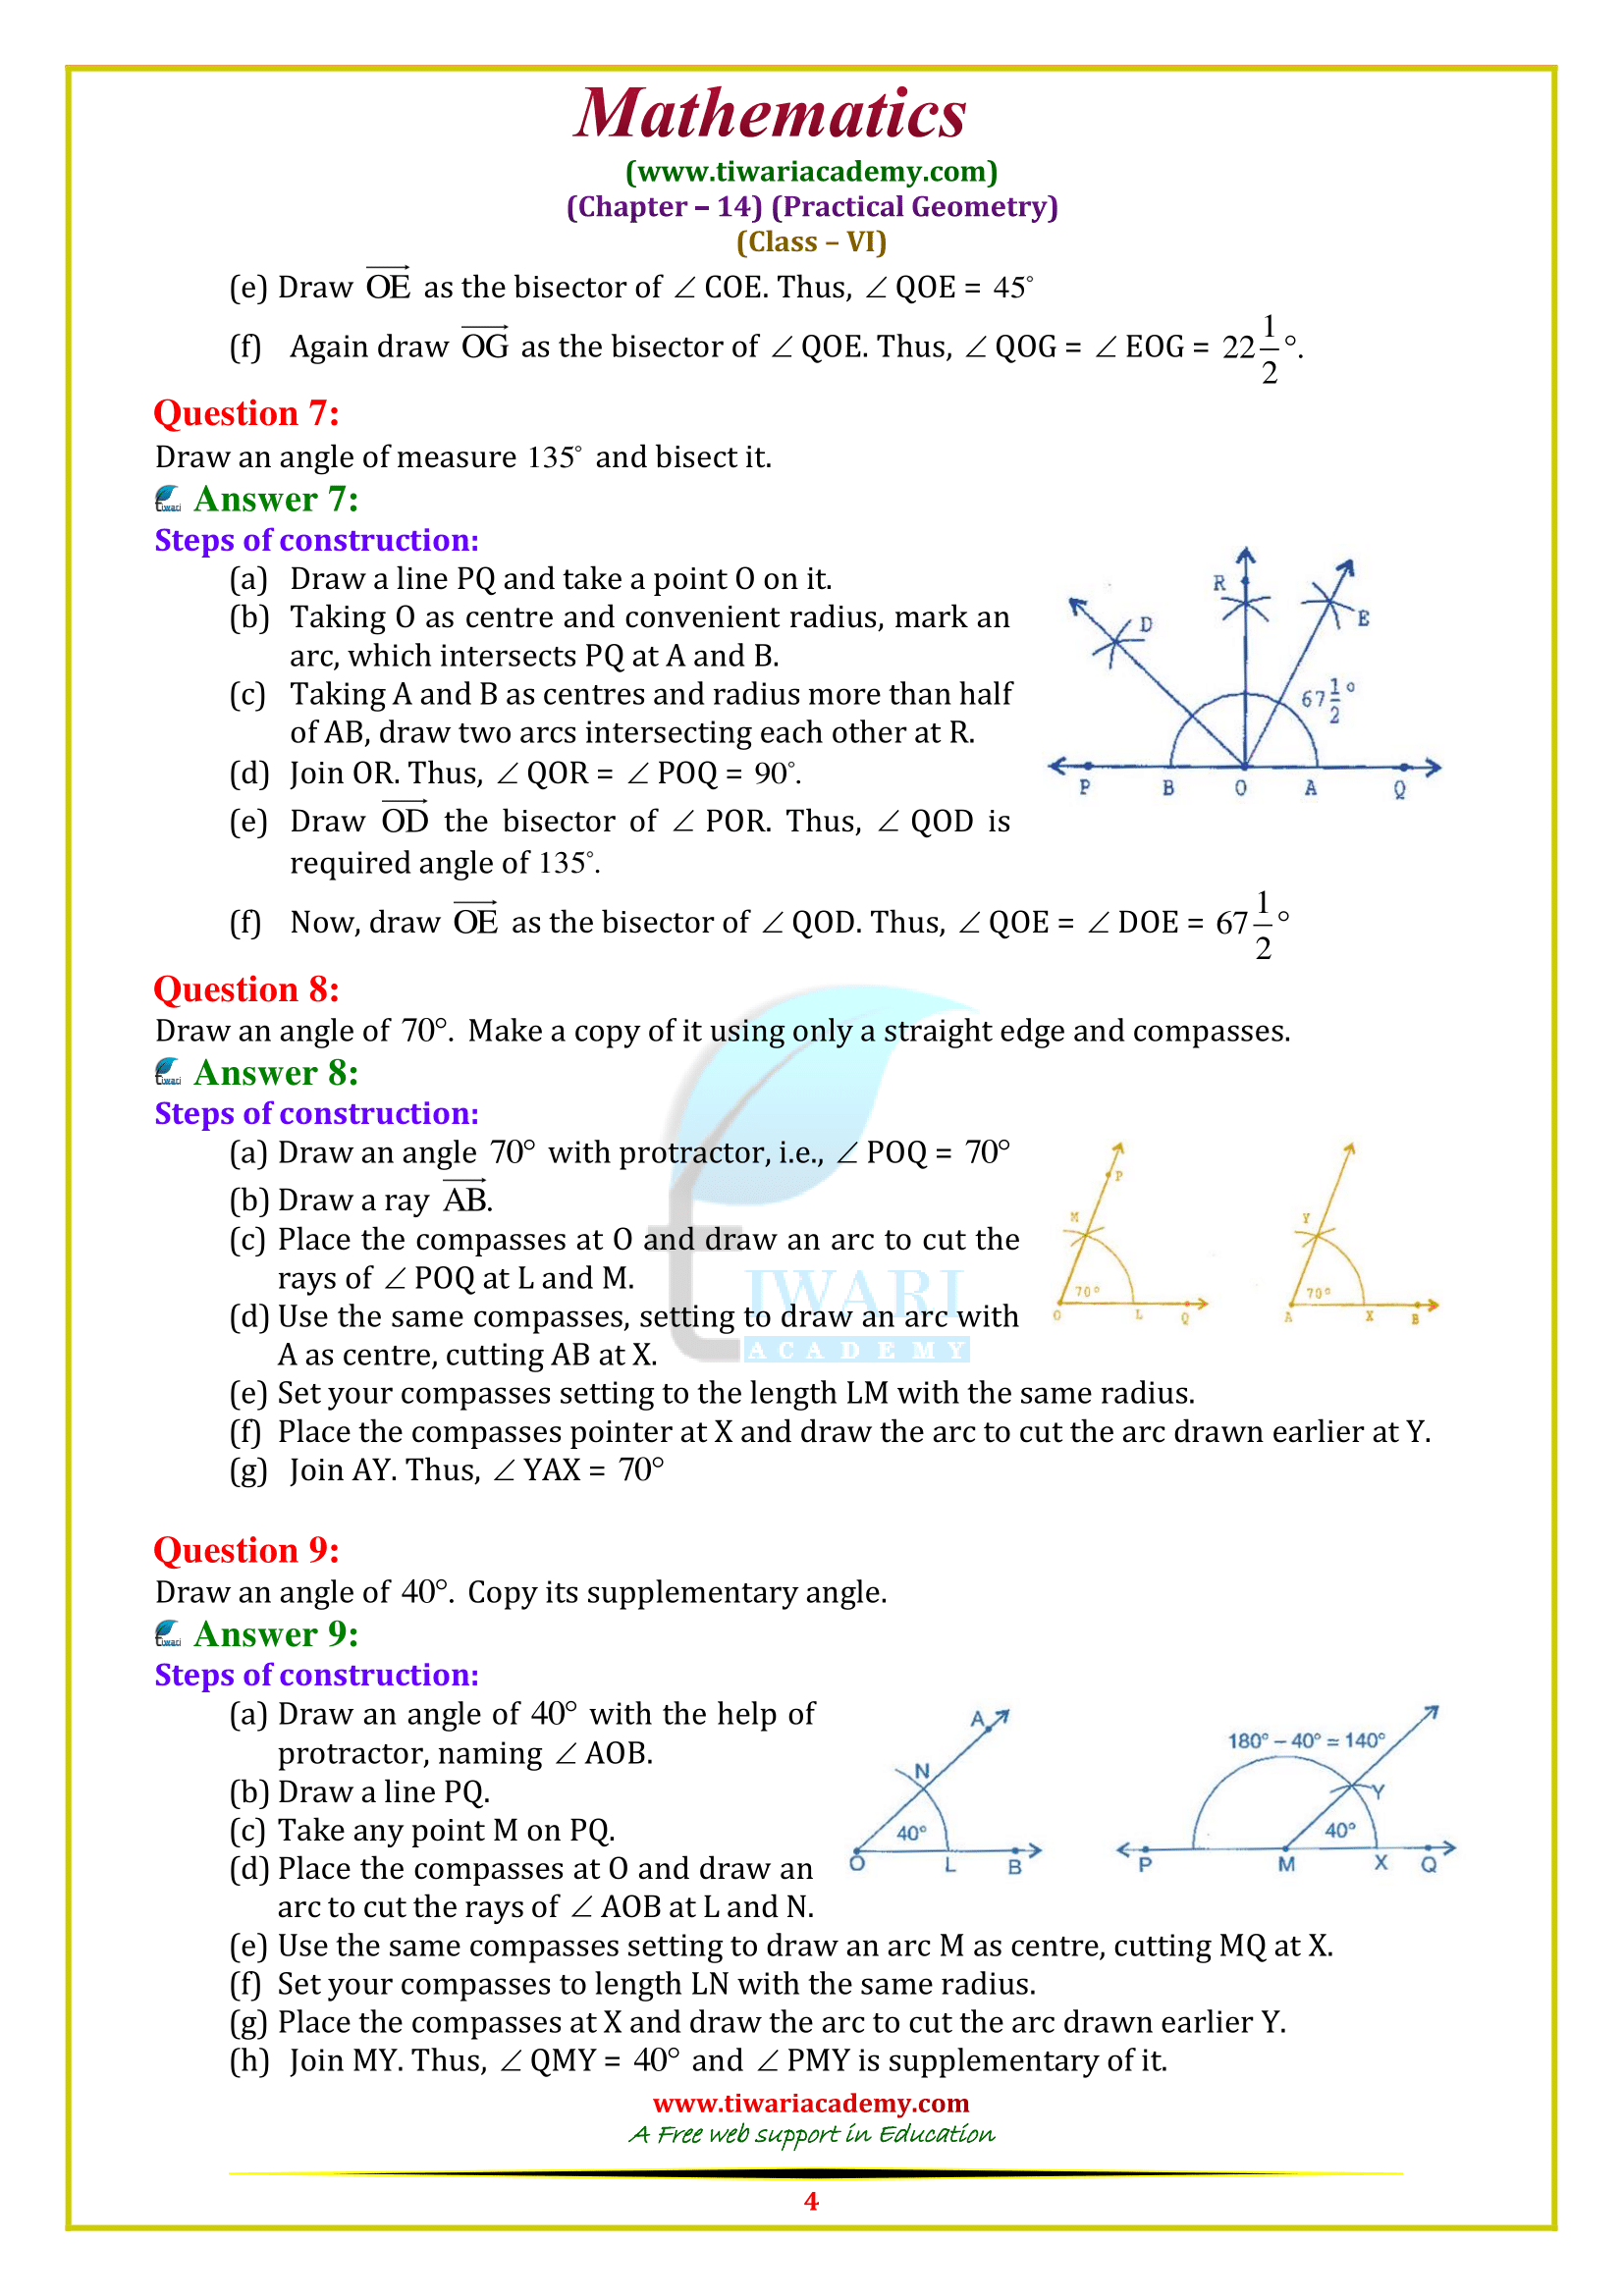 6 Maths exercise 14.6 guide